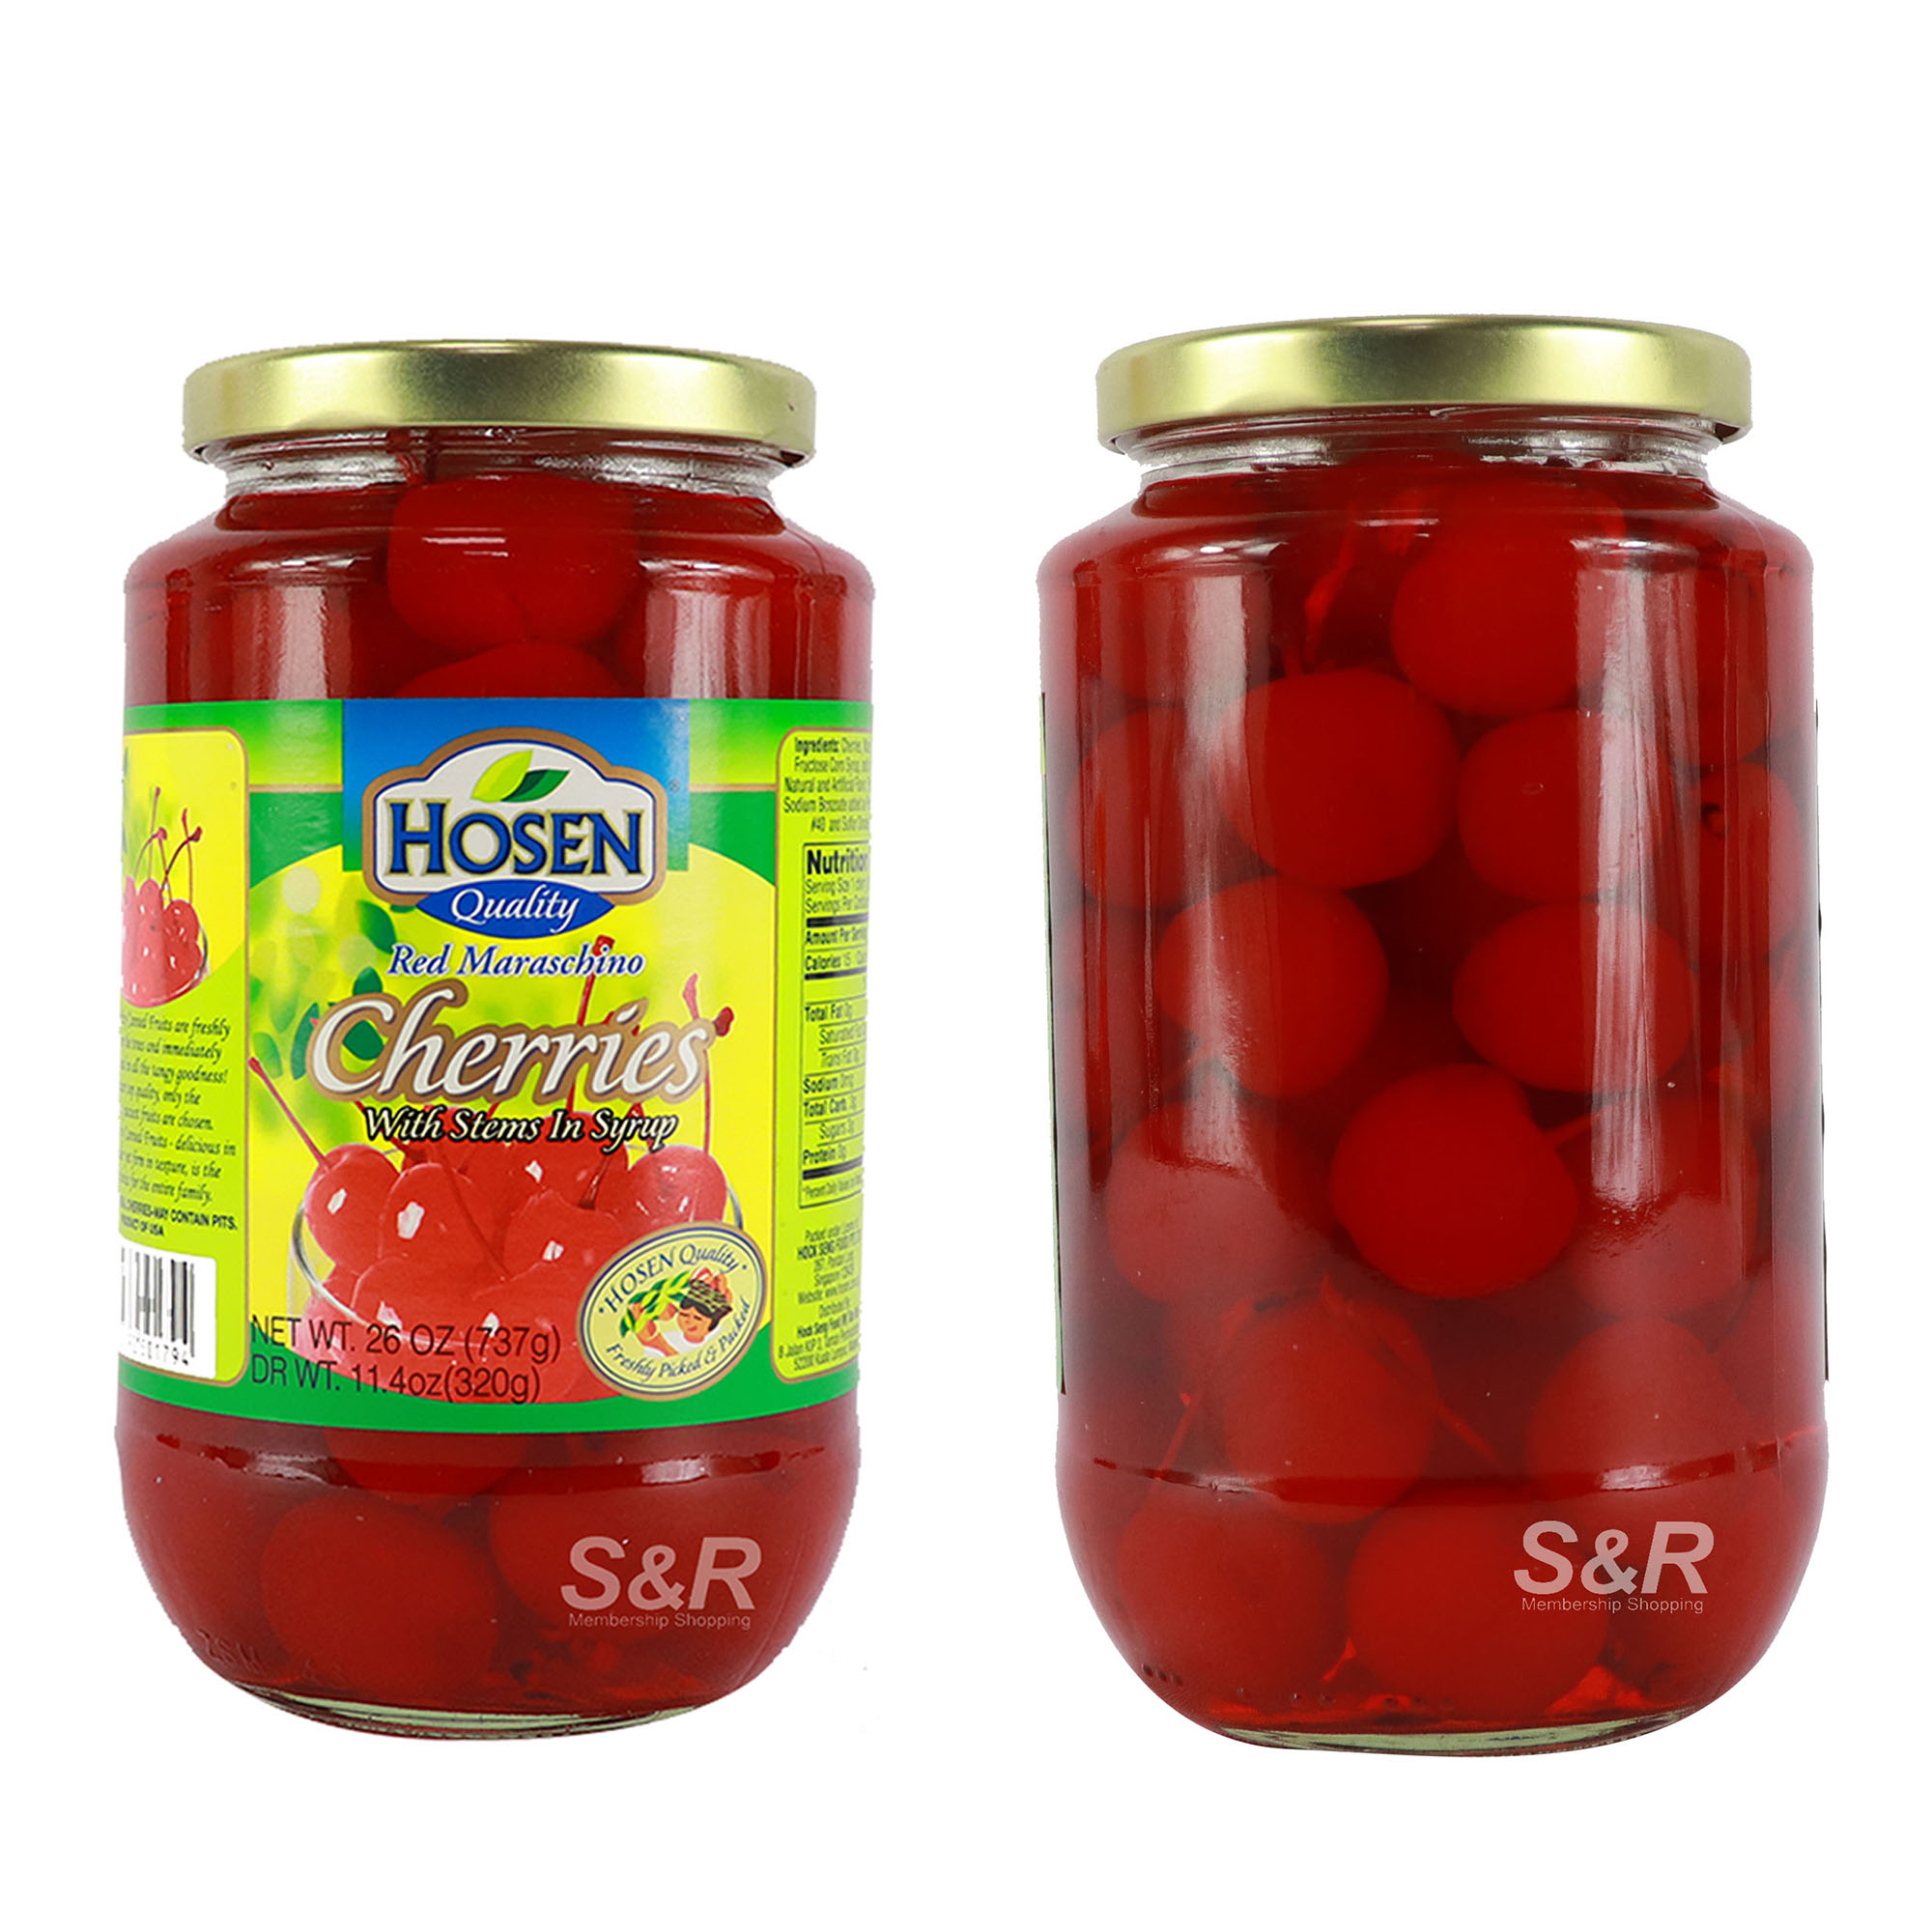 Red Maraschino Cherries with Stems in Syrup